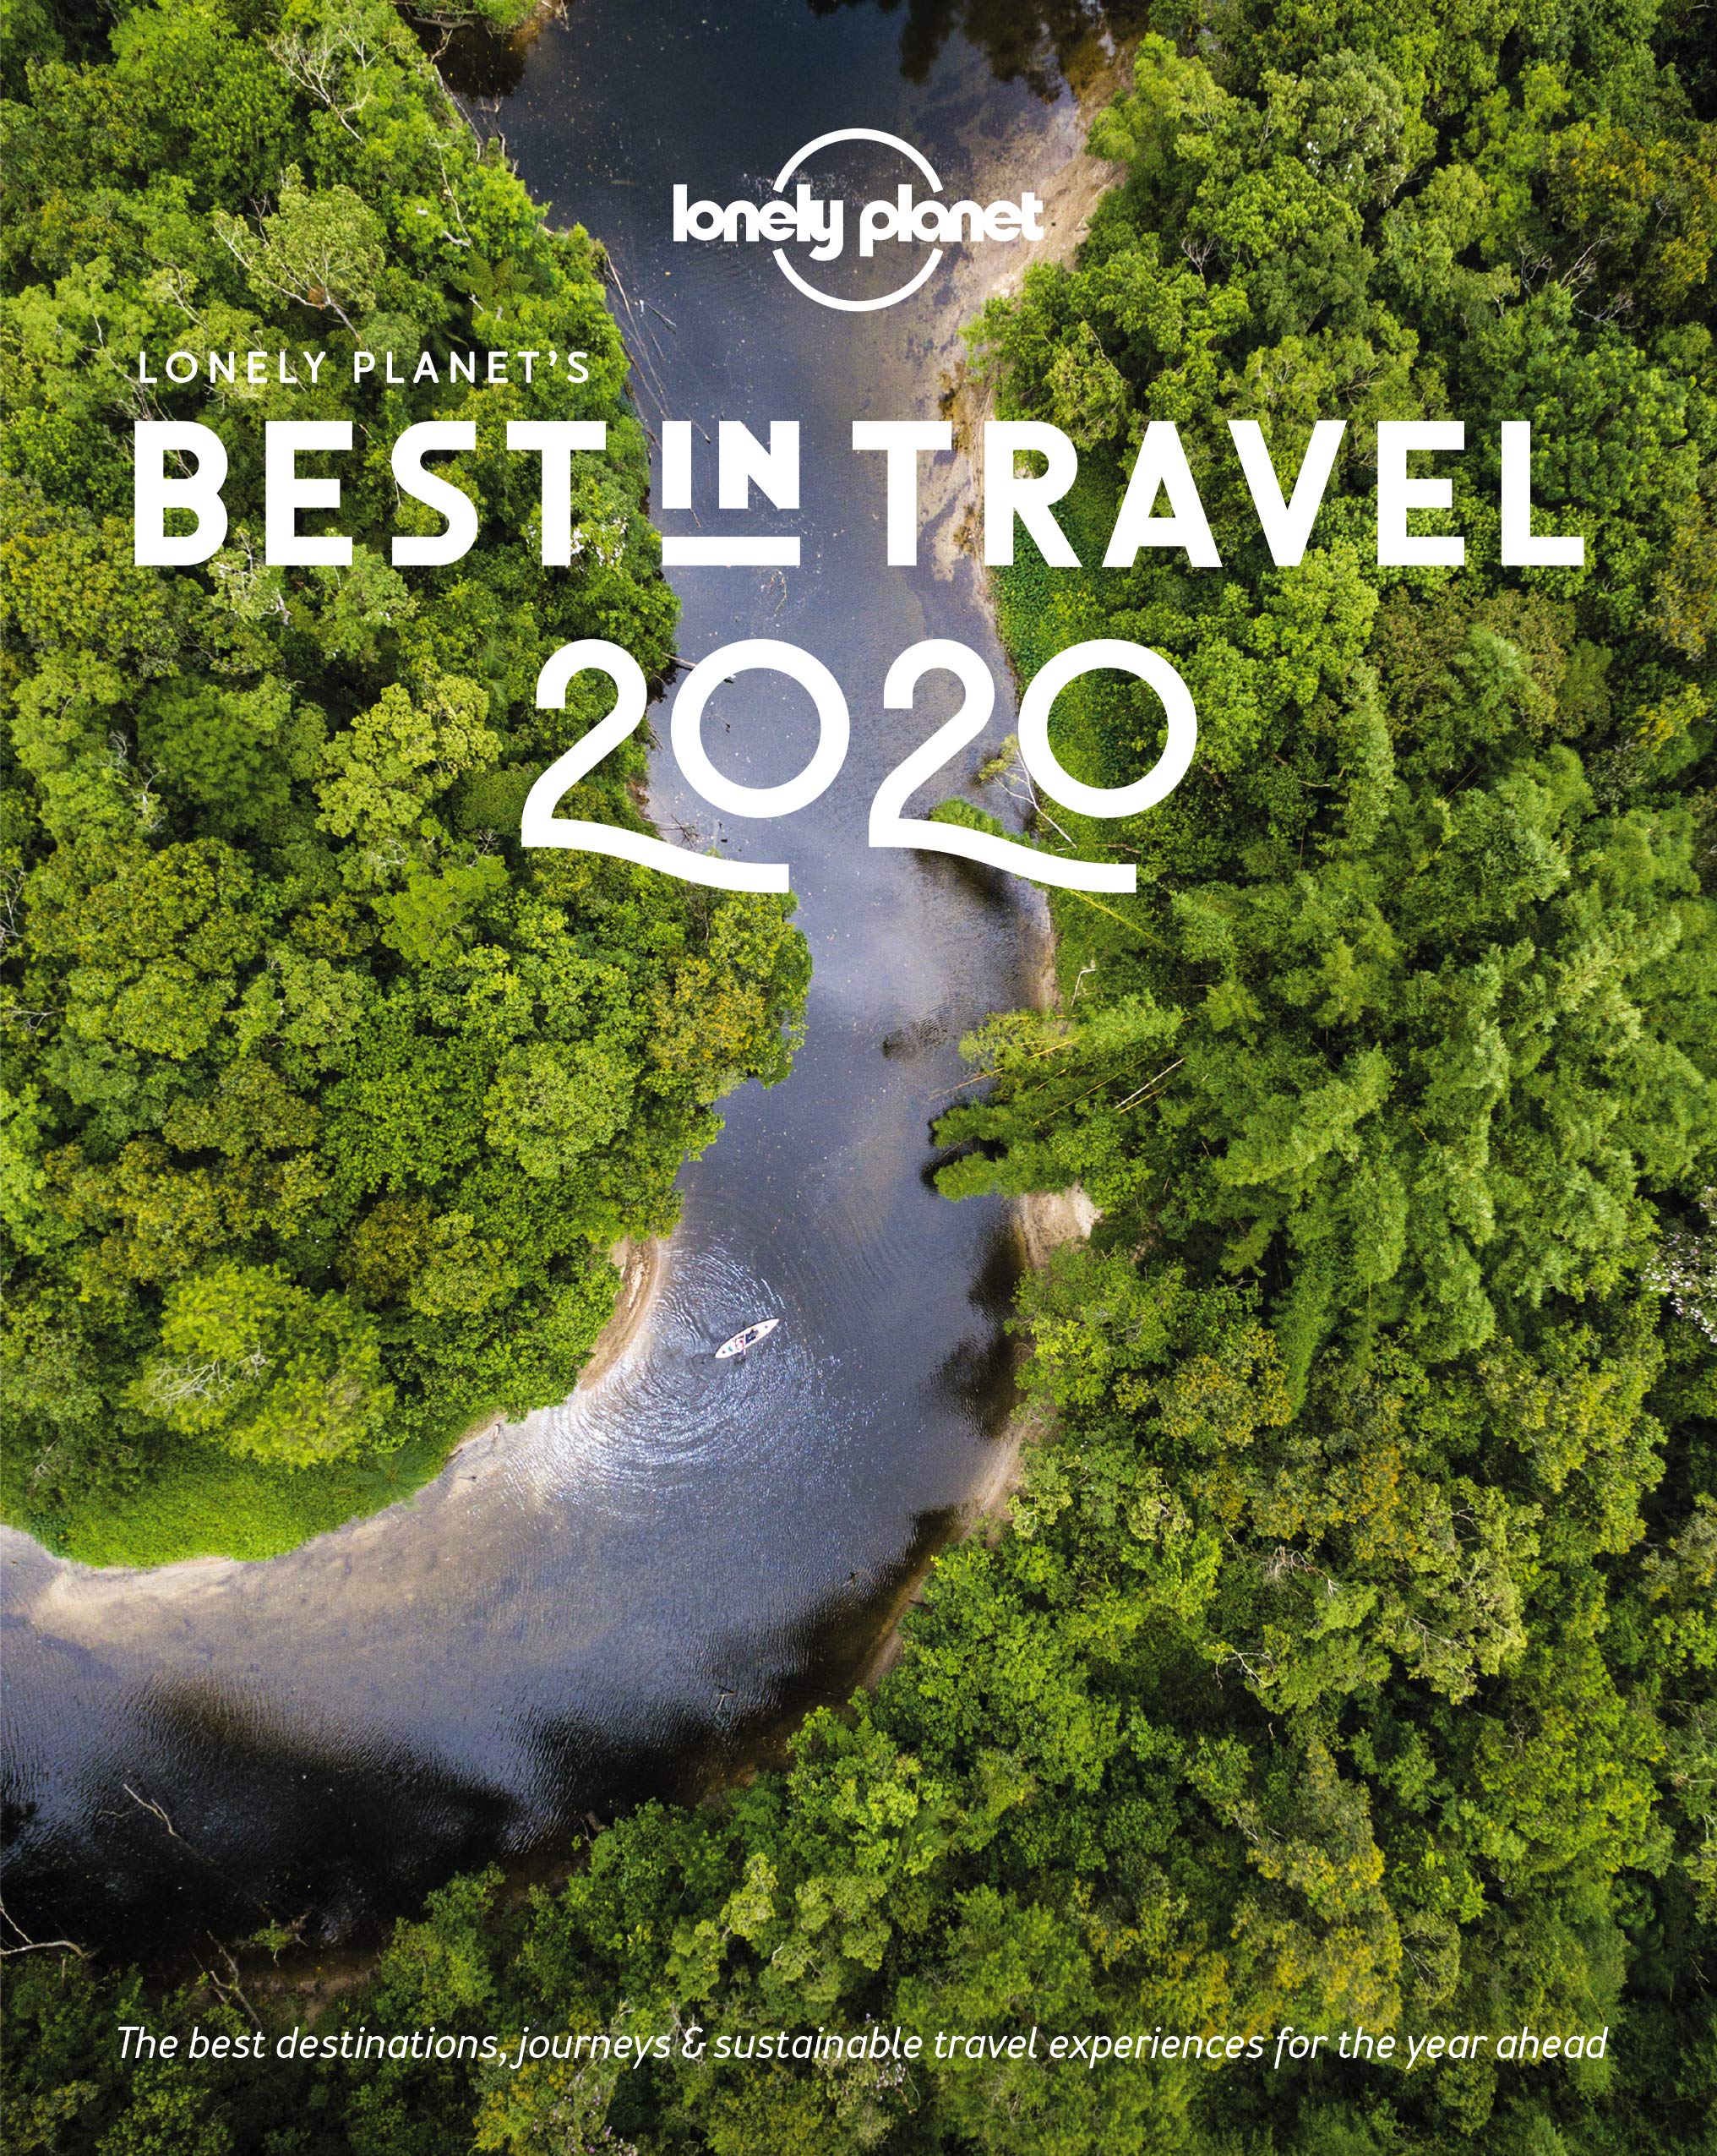 Lonely Planet's Best in Travel 2020 | Lonely Planet image2